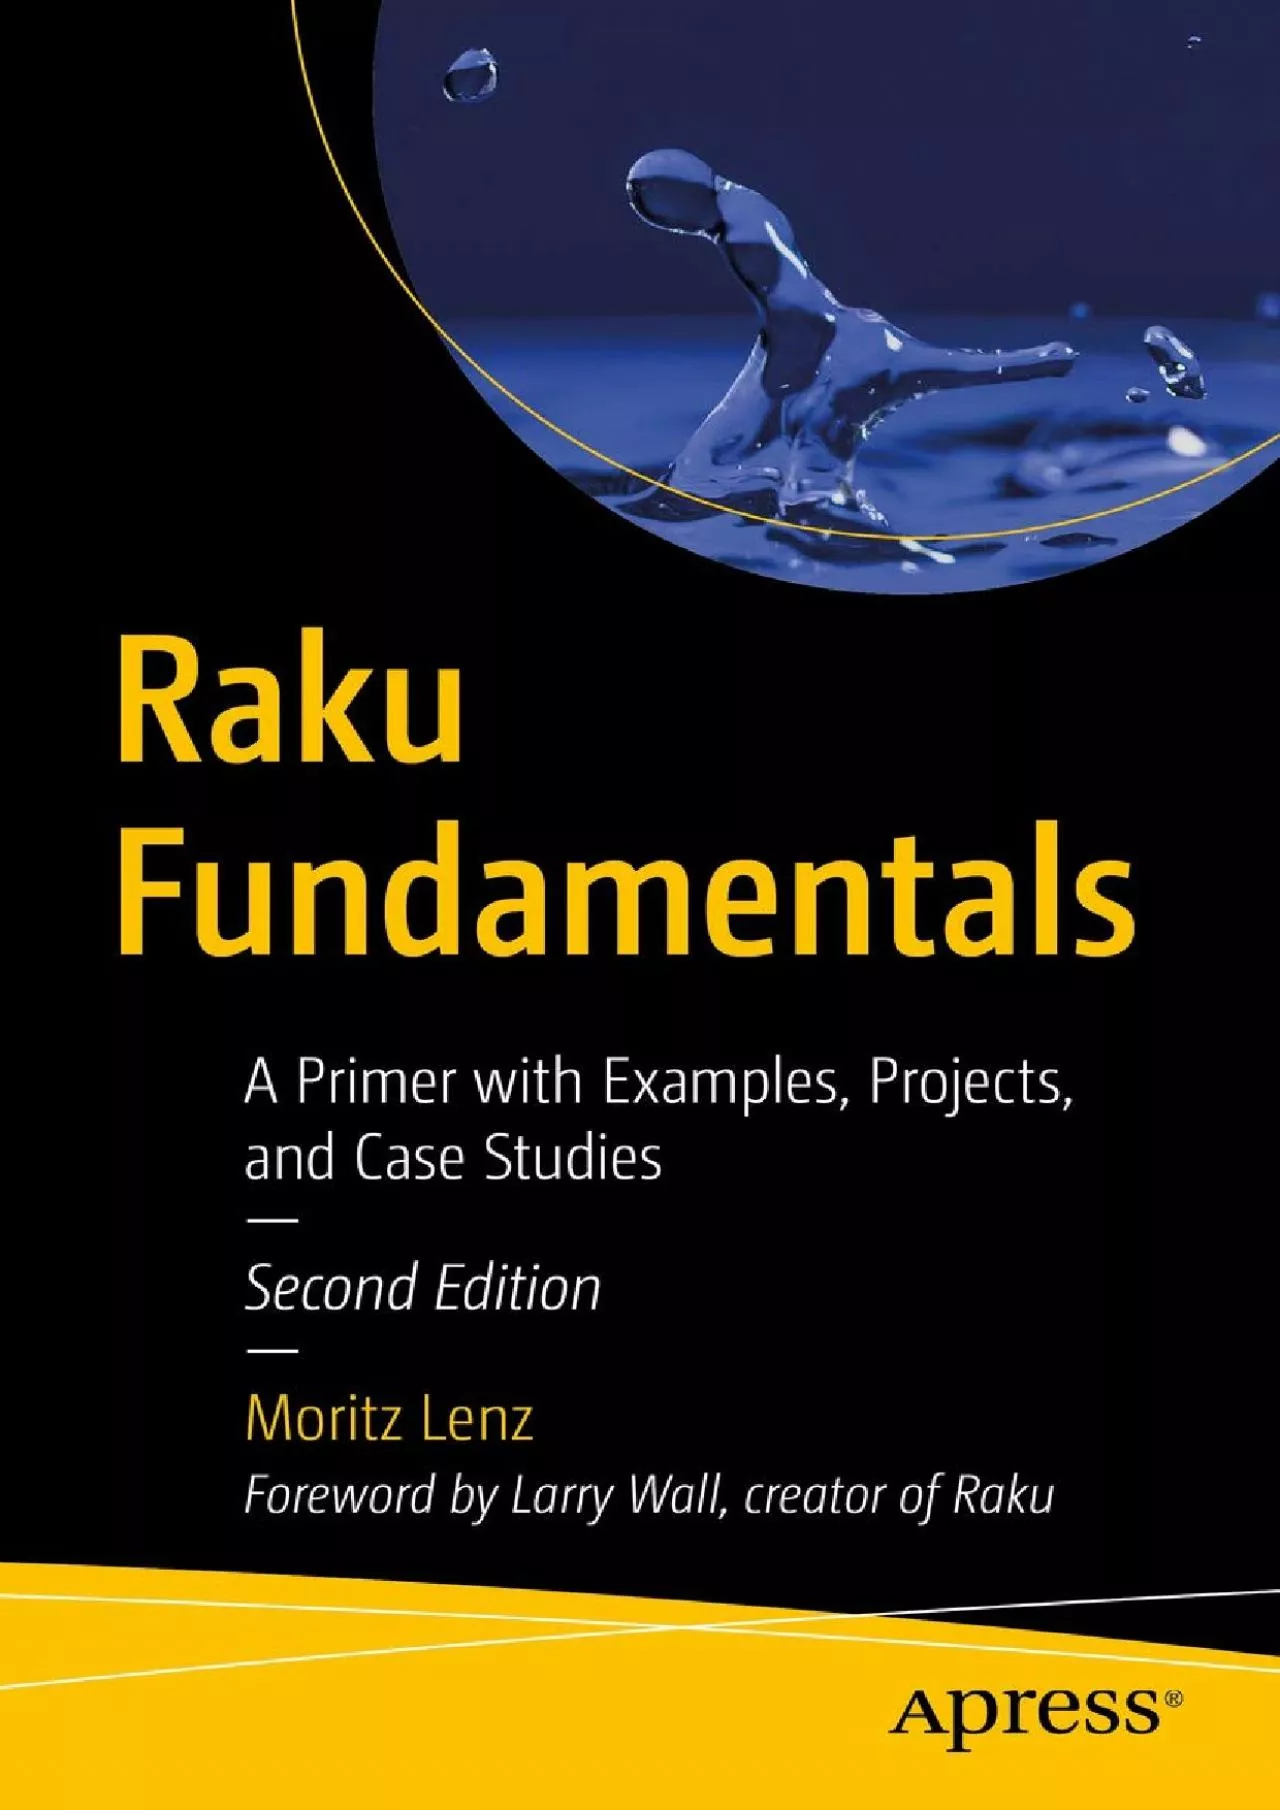 [READING BOOK]-Raku Fundamentals: A Primer with Examples, Projects, and Case Studies